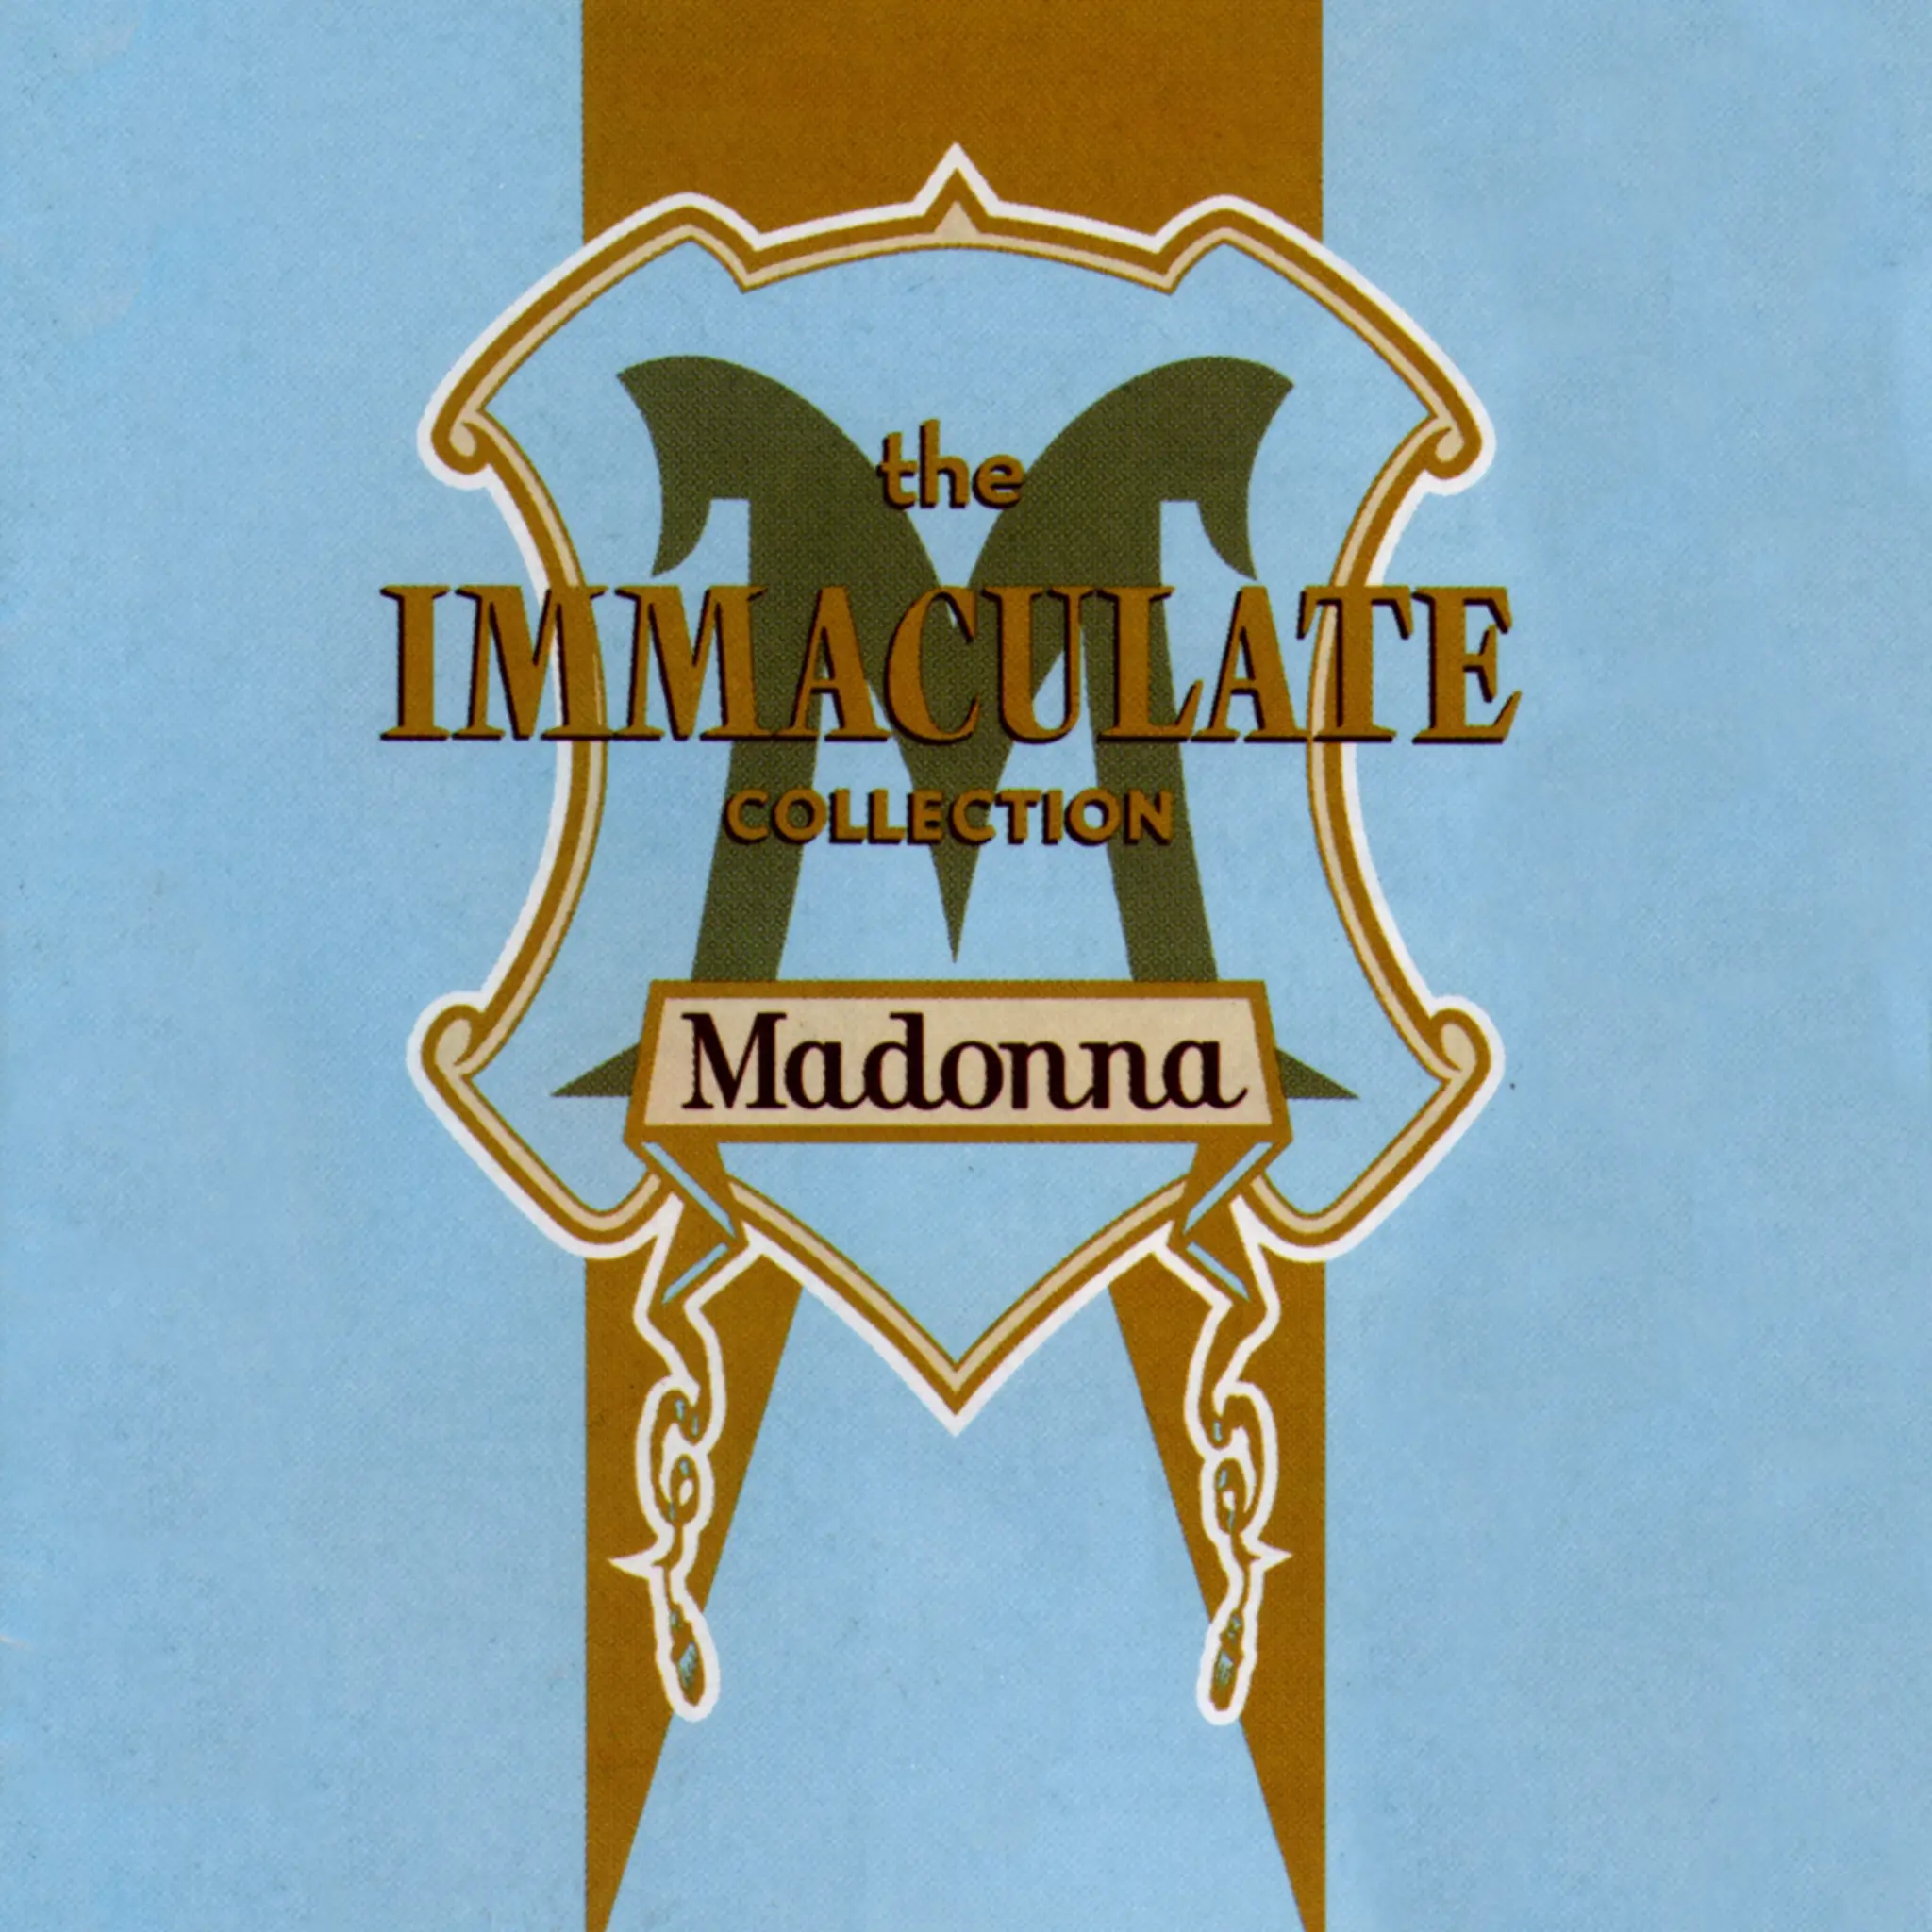 Madonna - The Immaculate Collection artwork